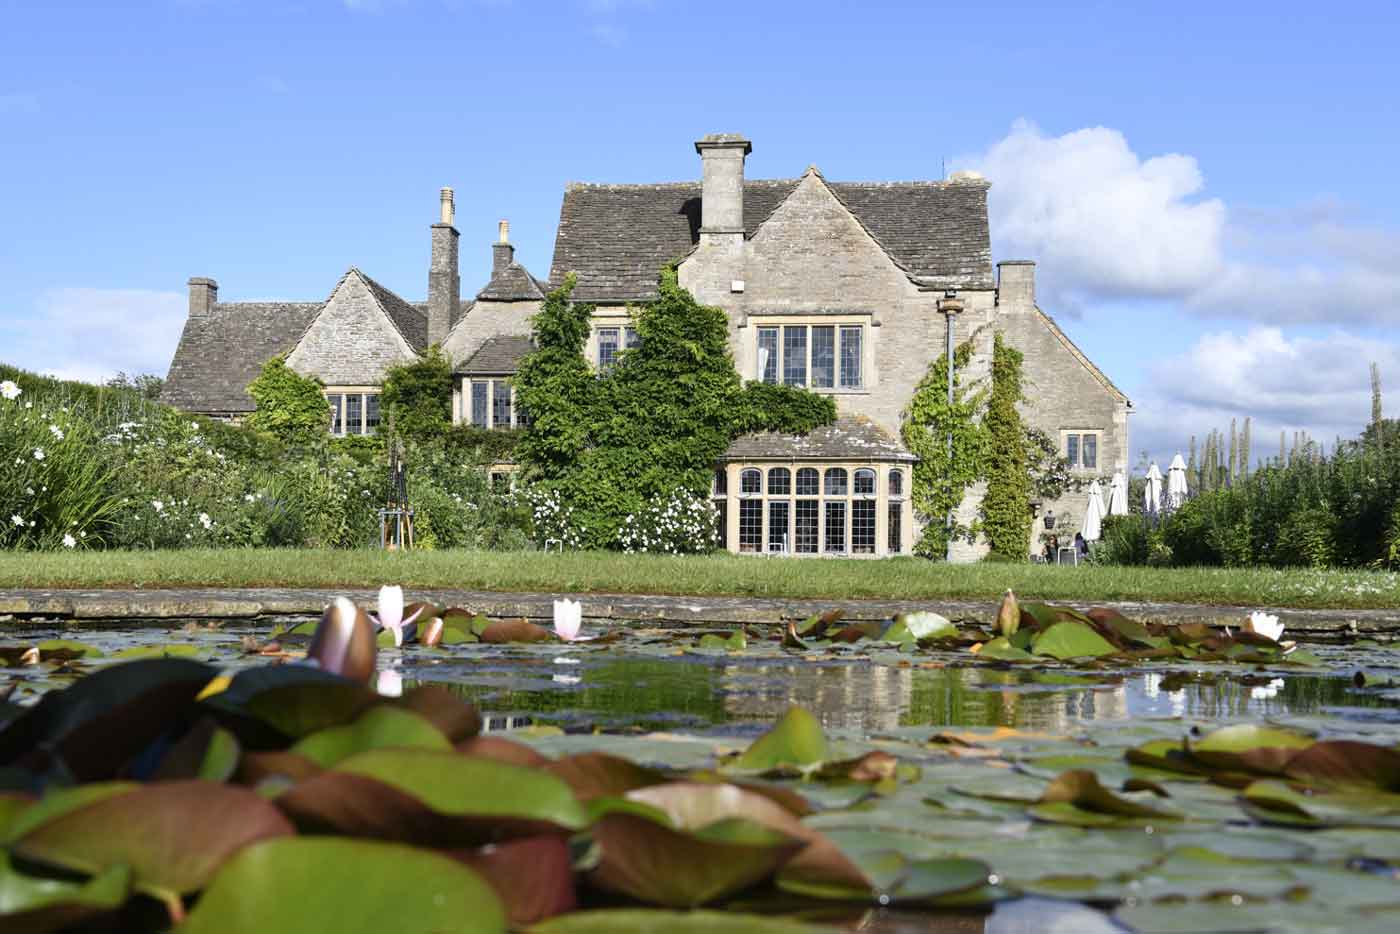 Whatley Manor Hotel and Spa, Wiltshire